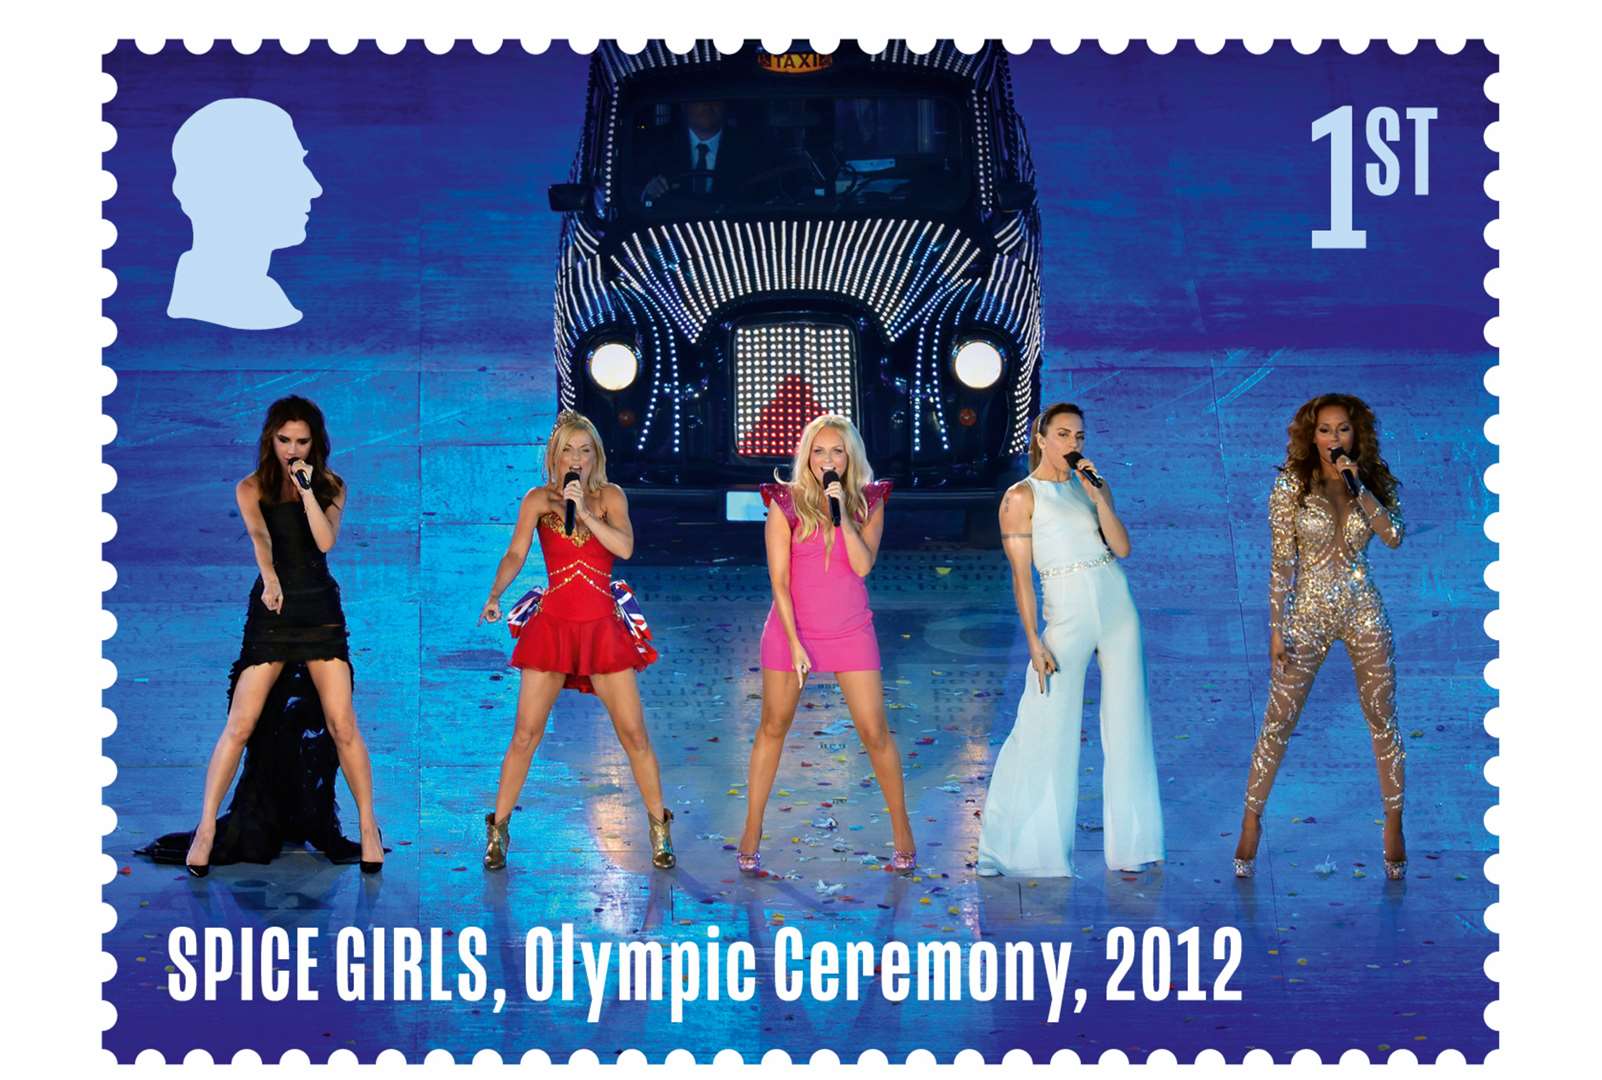 The collectable stamps include their appearance at the London 2012 Olympics. Image: Royal Mail.